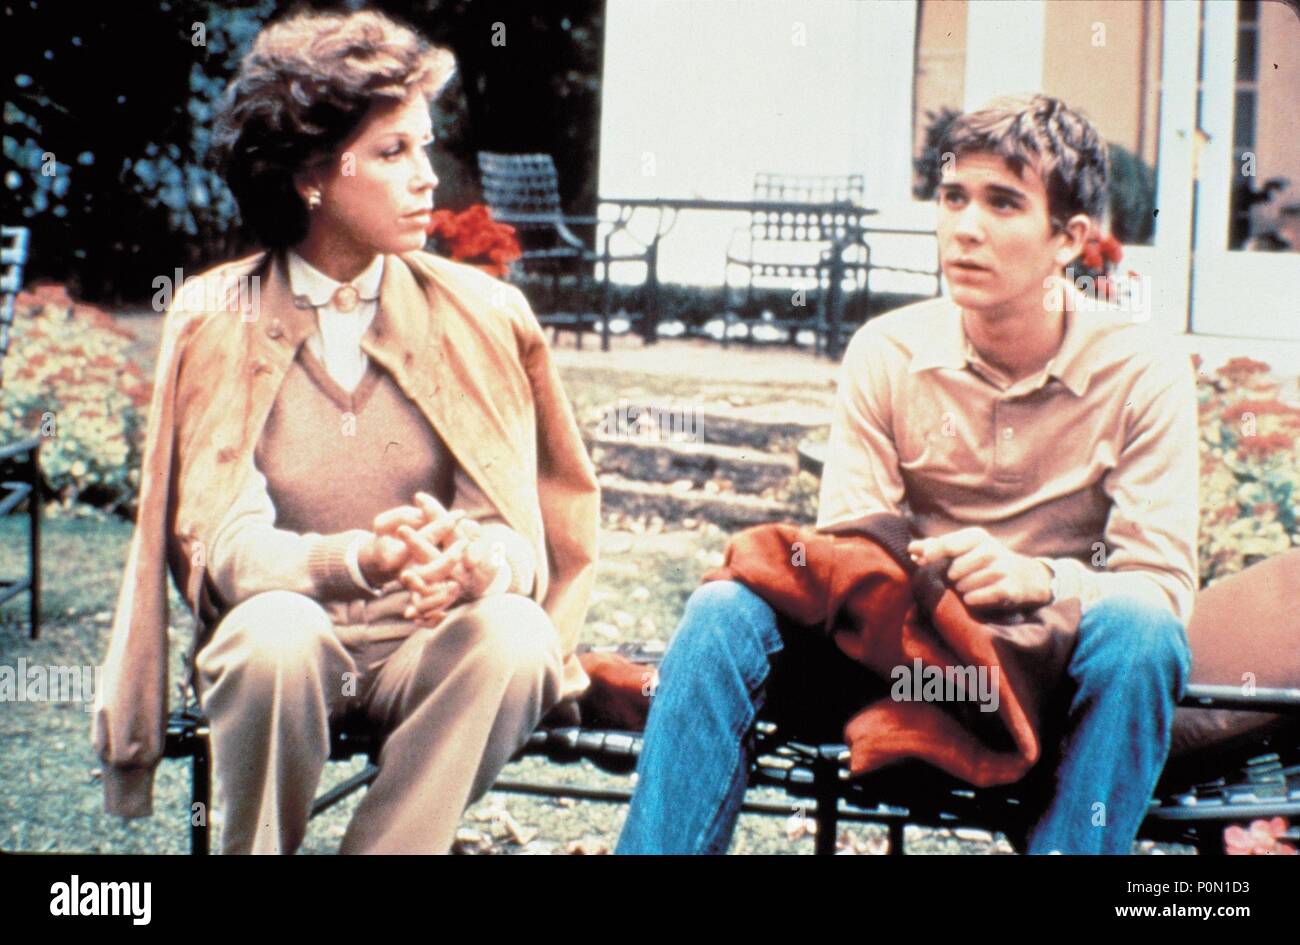 Original Film Title: ORDINARY PEOPLE.  English Title: ORDINARY PEOPLE.  Film Director: ROBERT REDFORD.  Year: 1980.  Stars: TIMOTHY HUTTON; MARY TYLER MOORE. Credit: PARAMOUNT PICTURES / Album Stock Photo